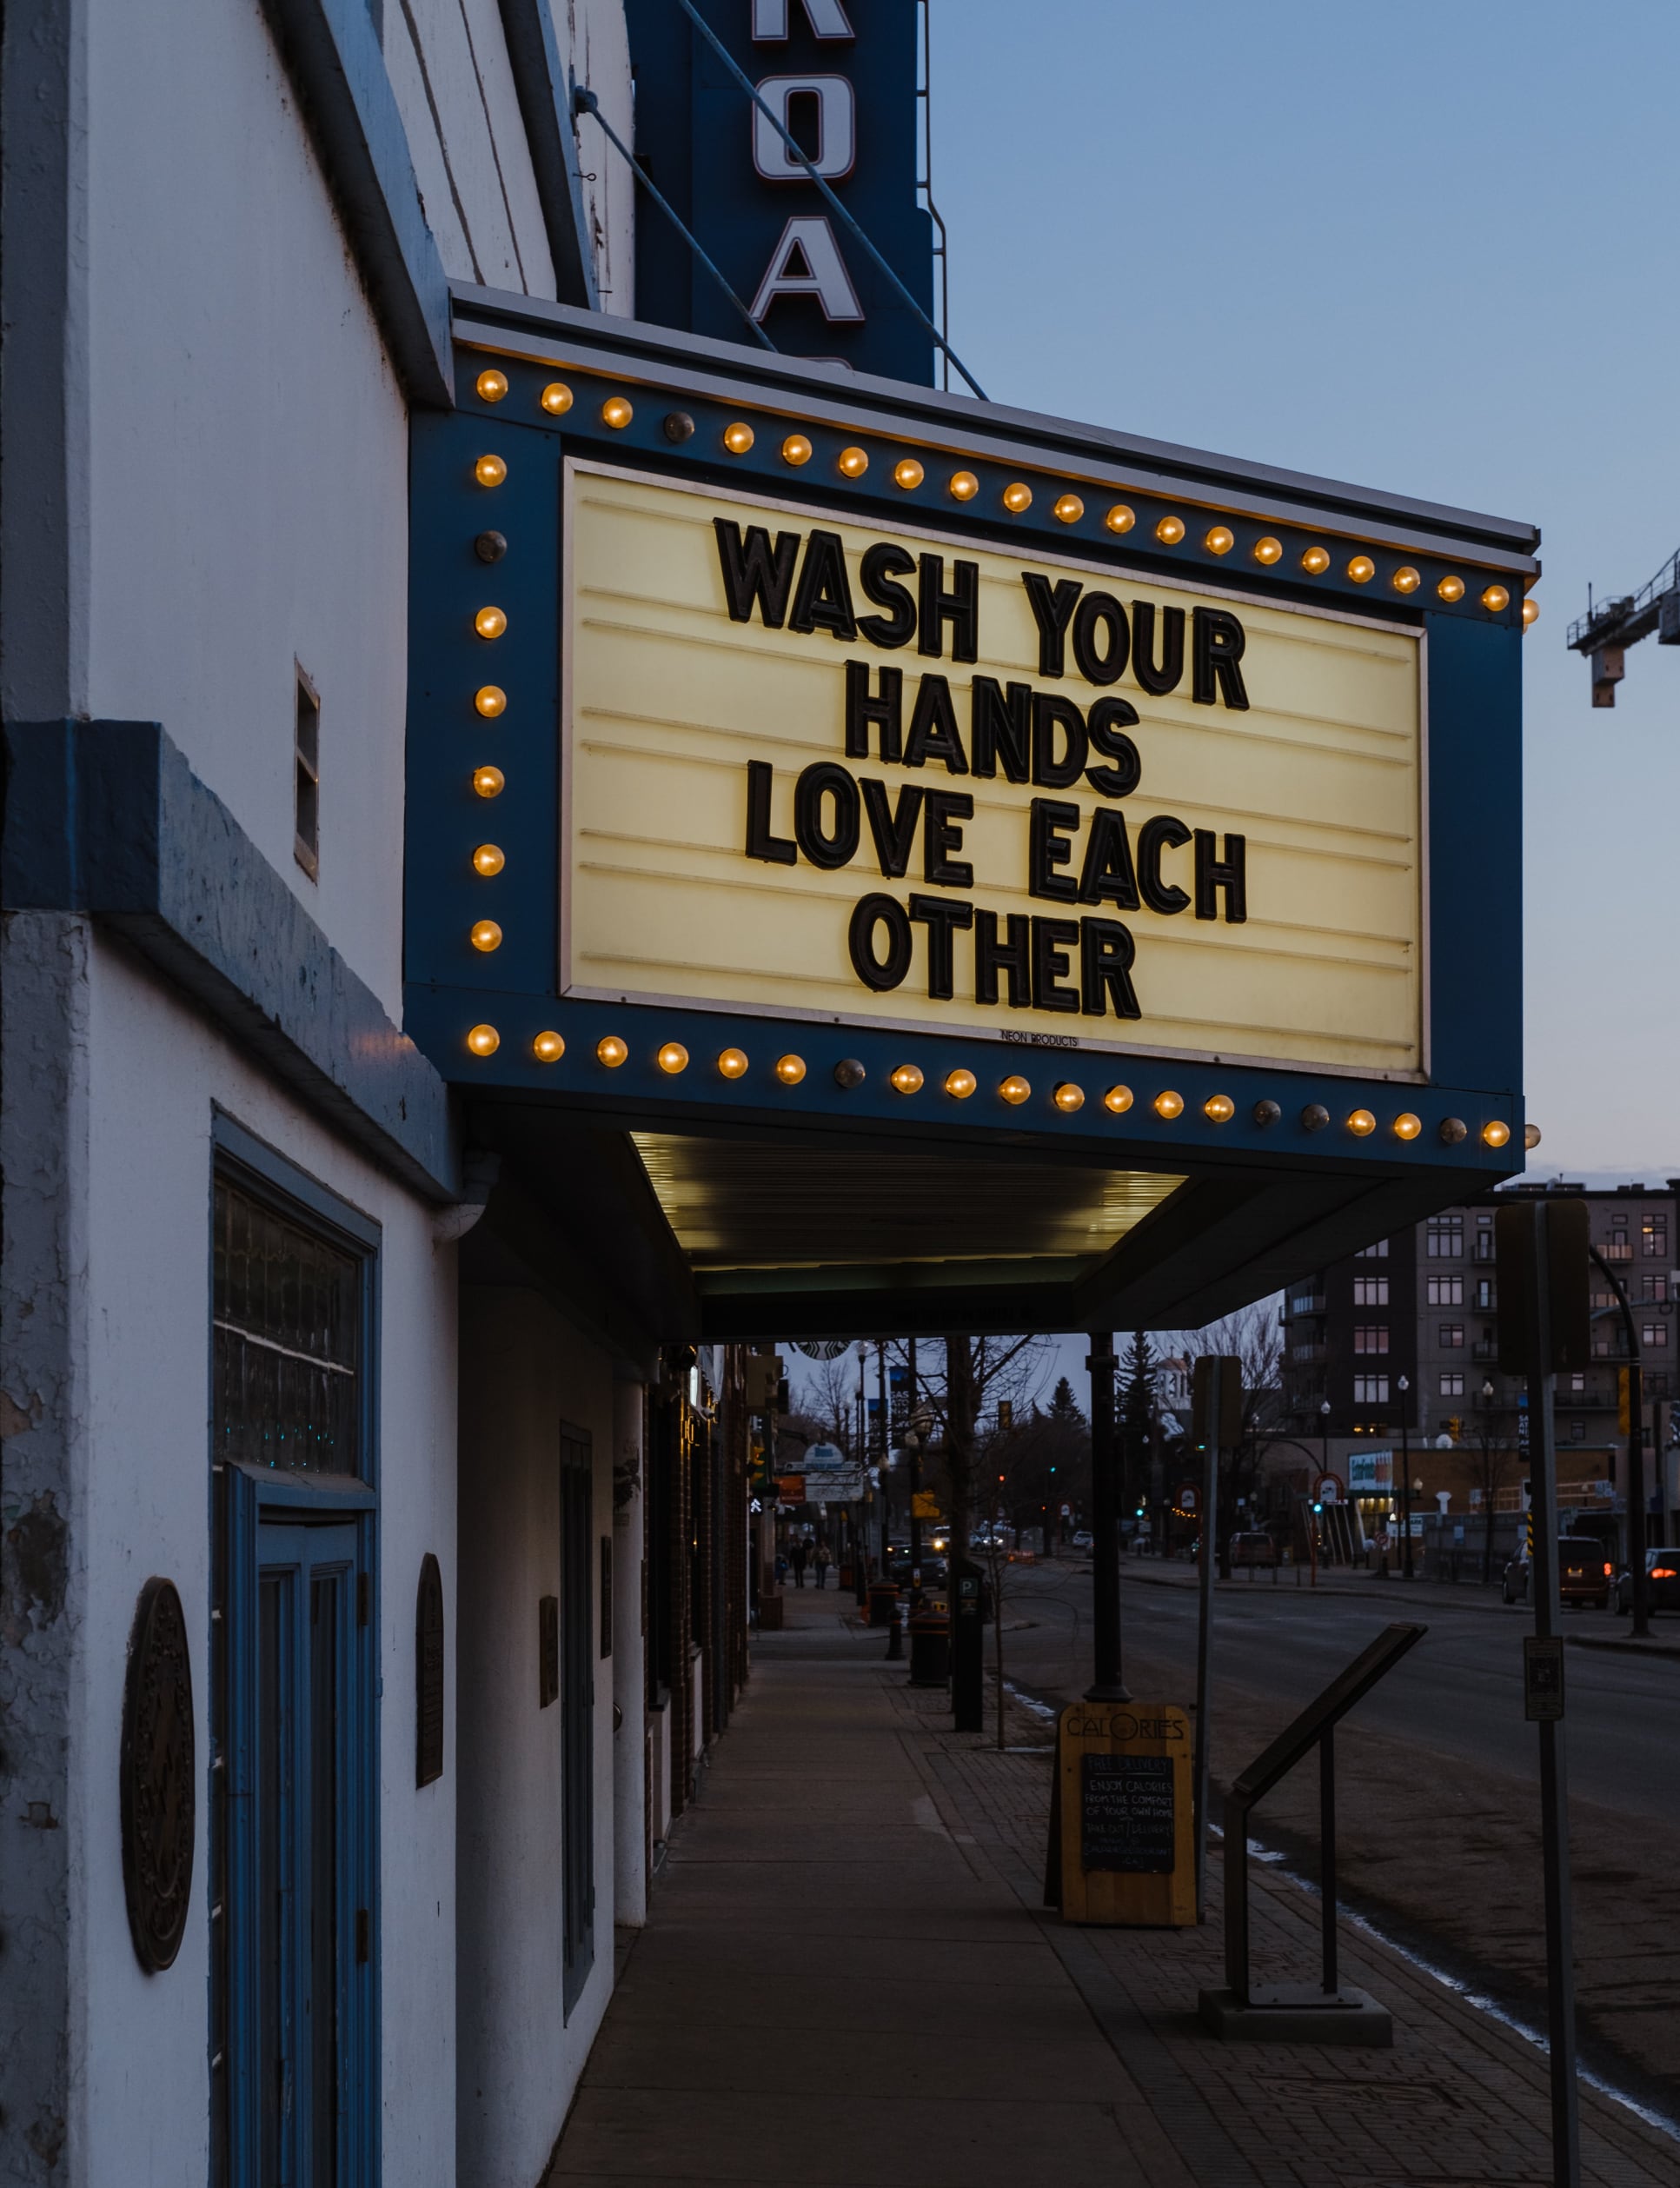 Wash you hands and love eachother